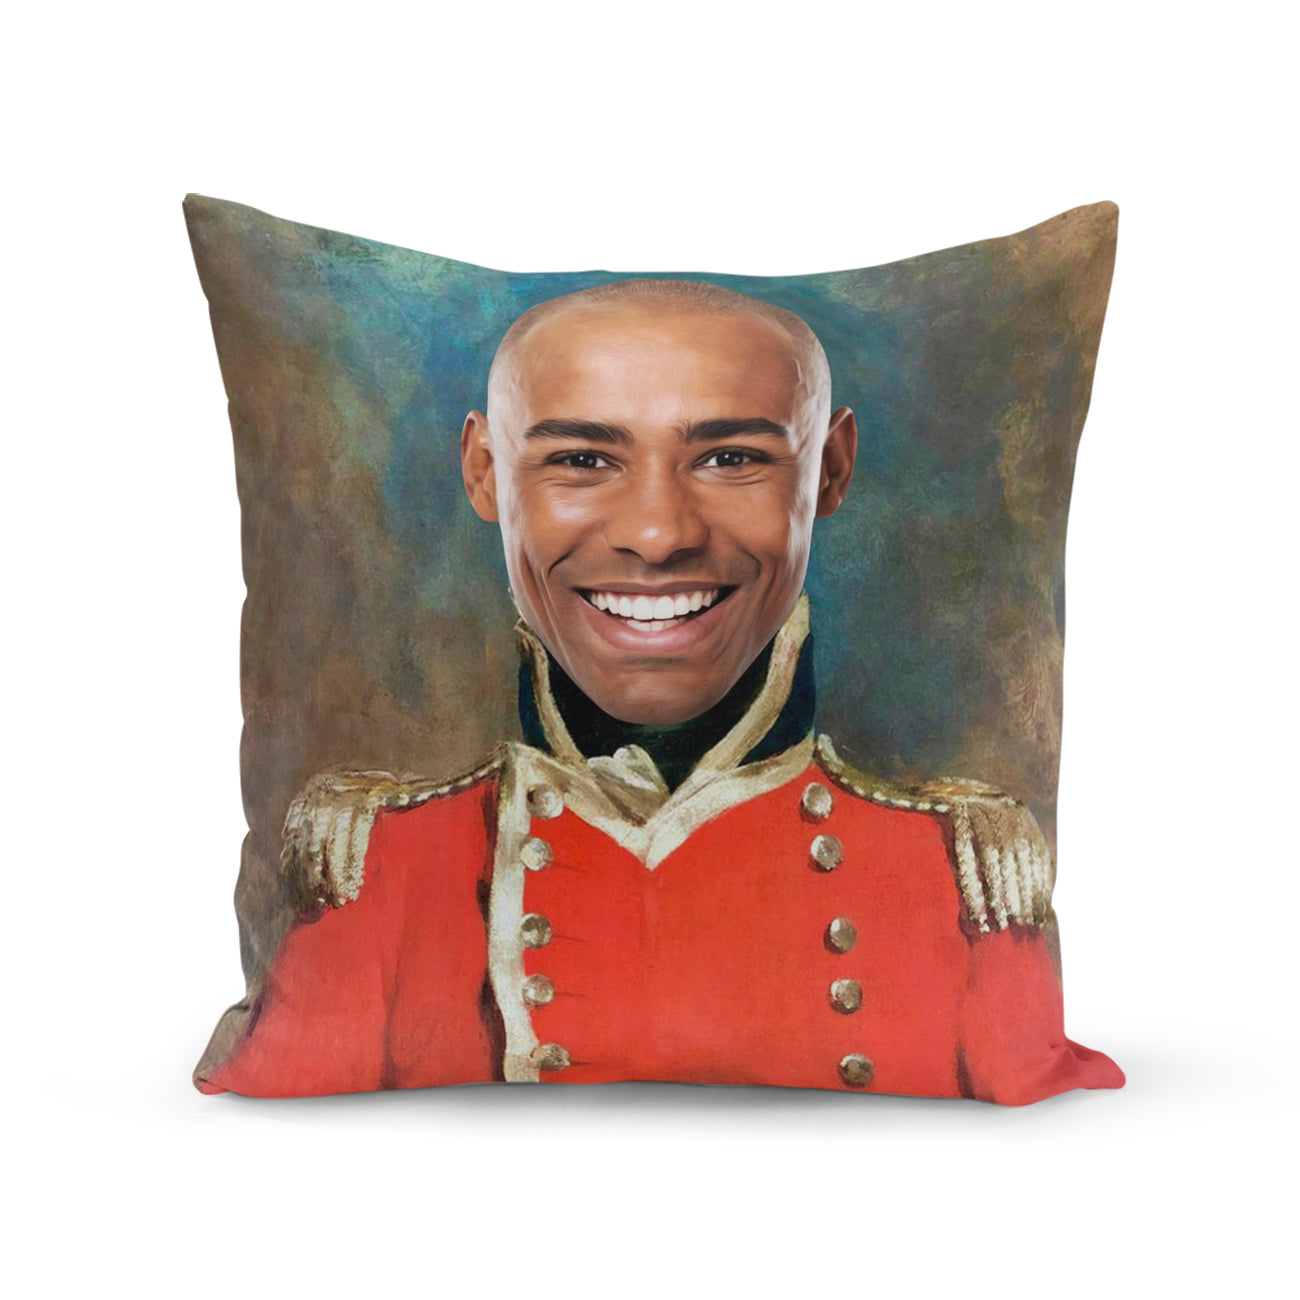 The Soldier Cushion